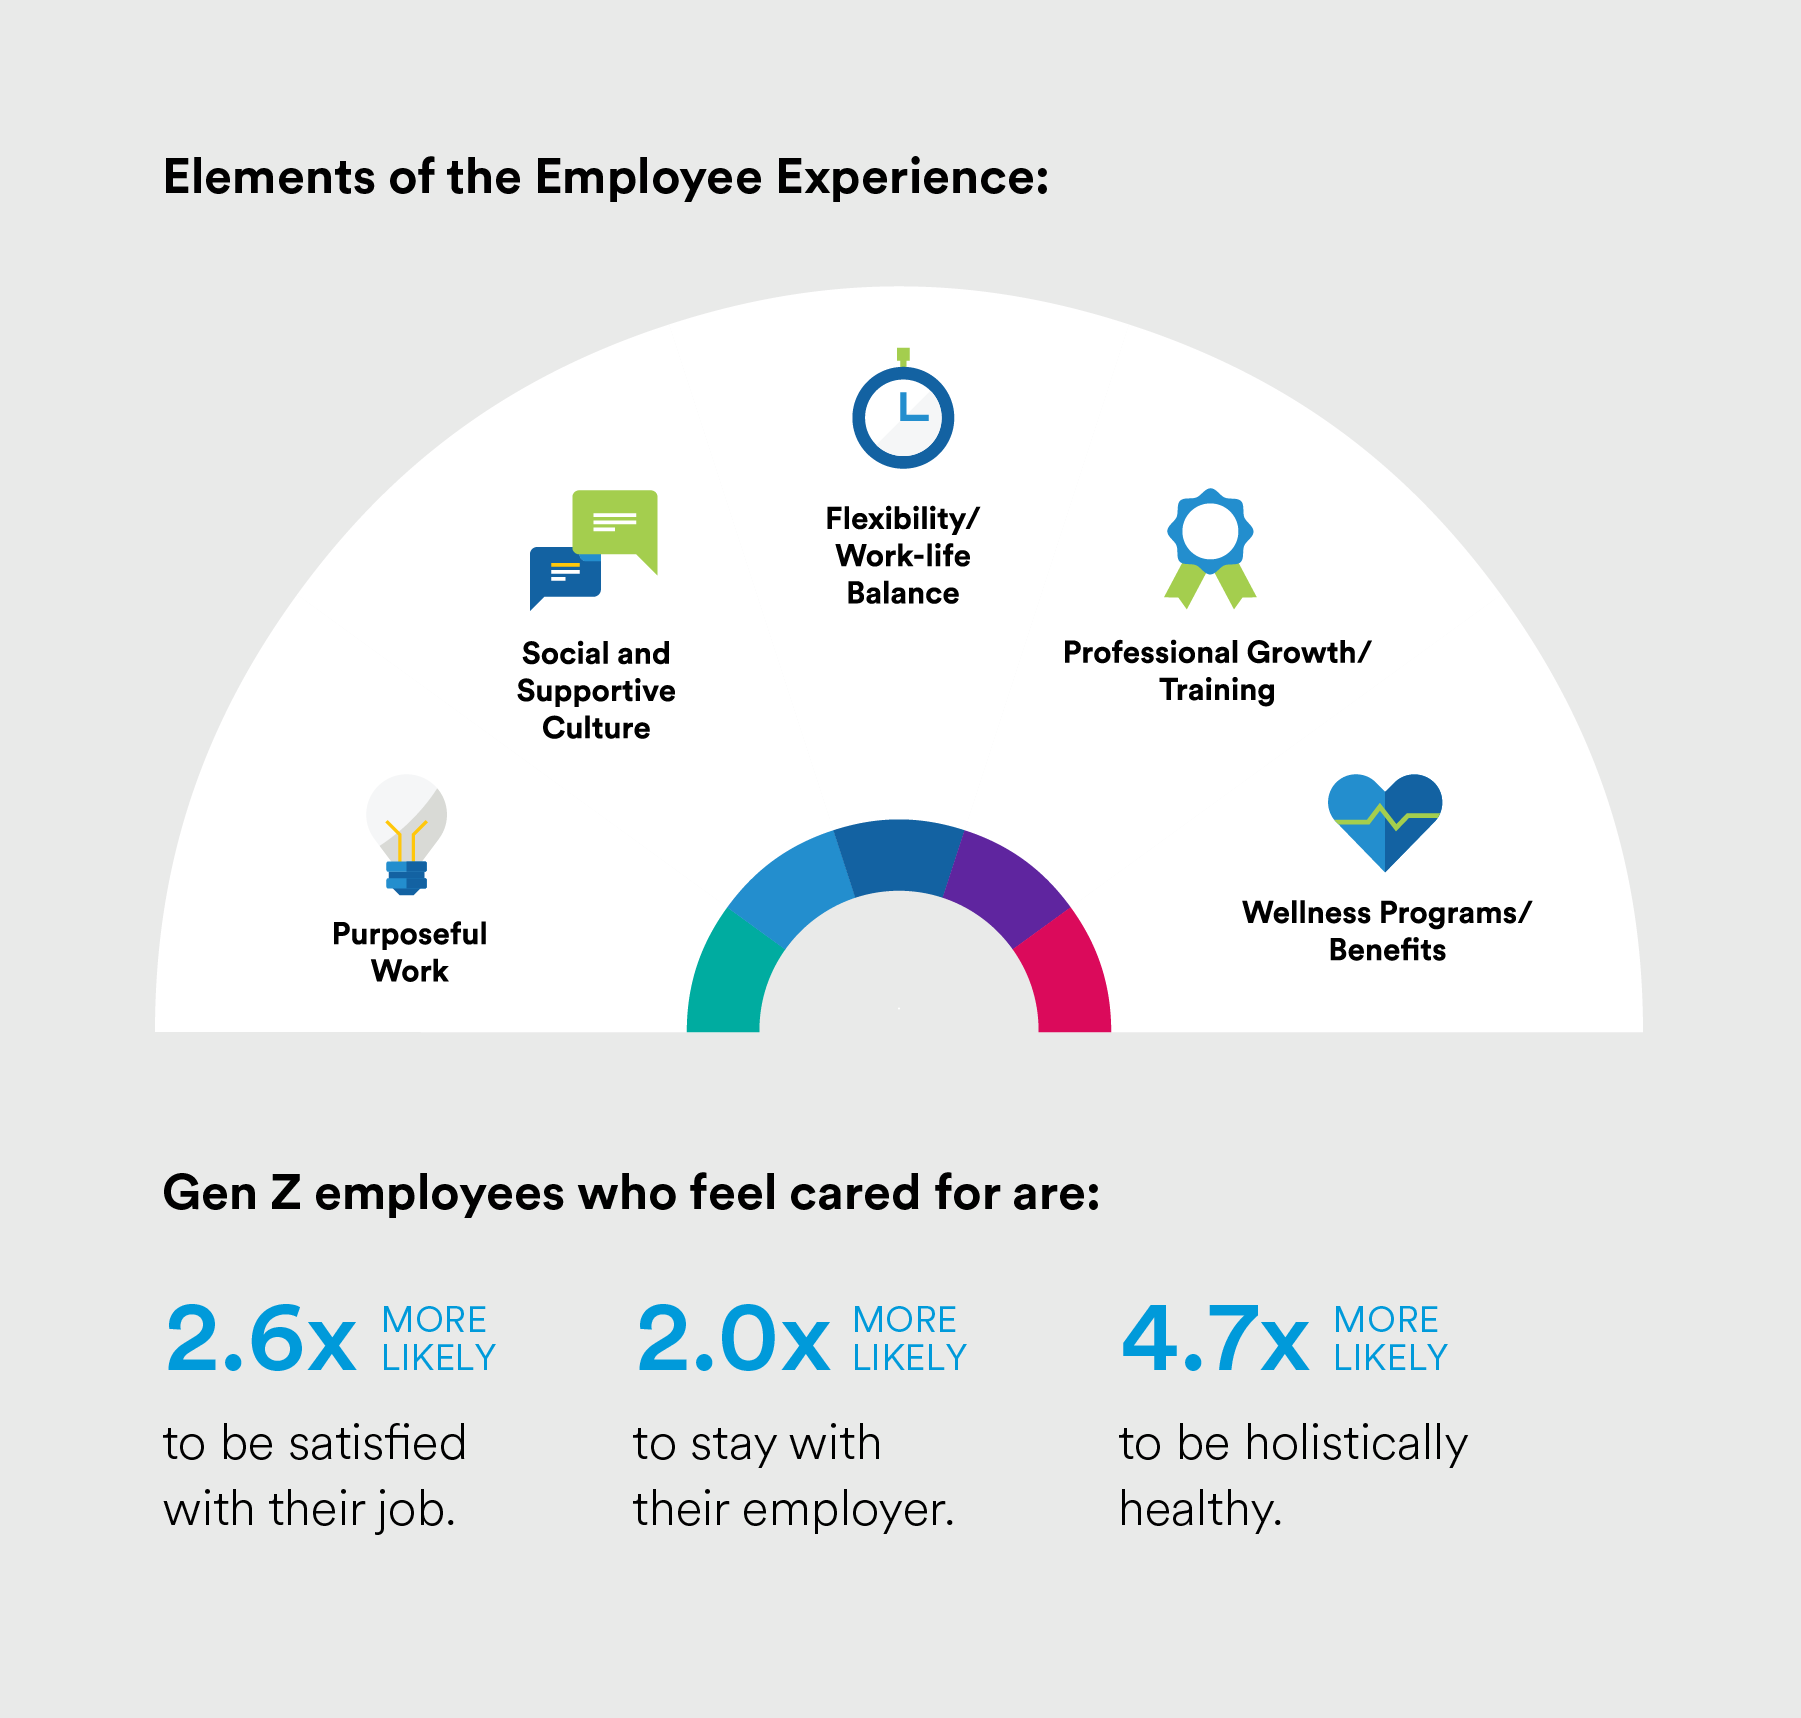 Elements of Employee Experience